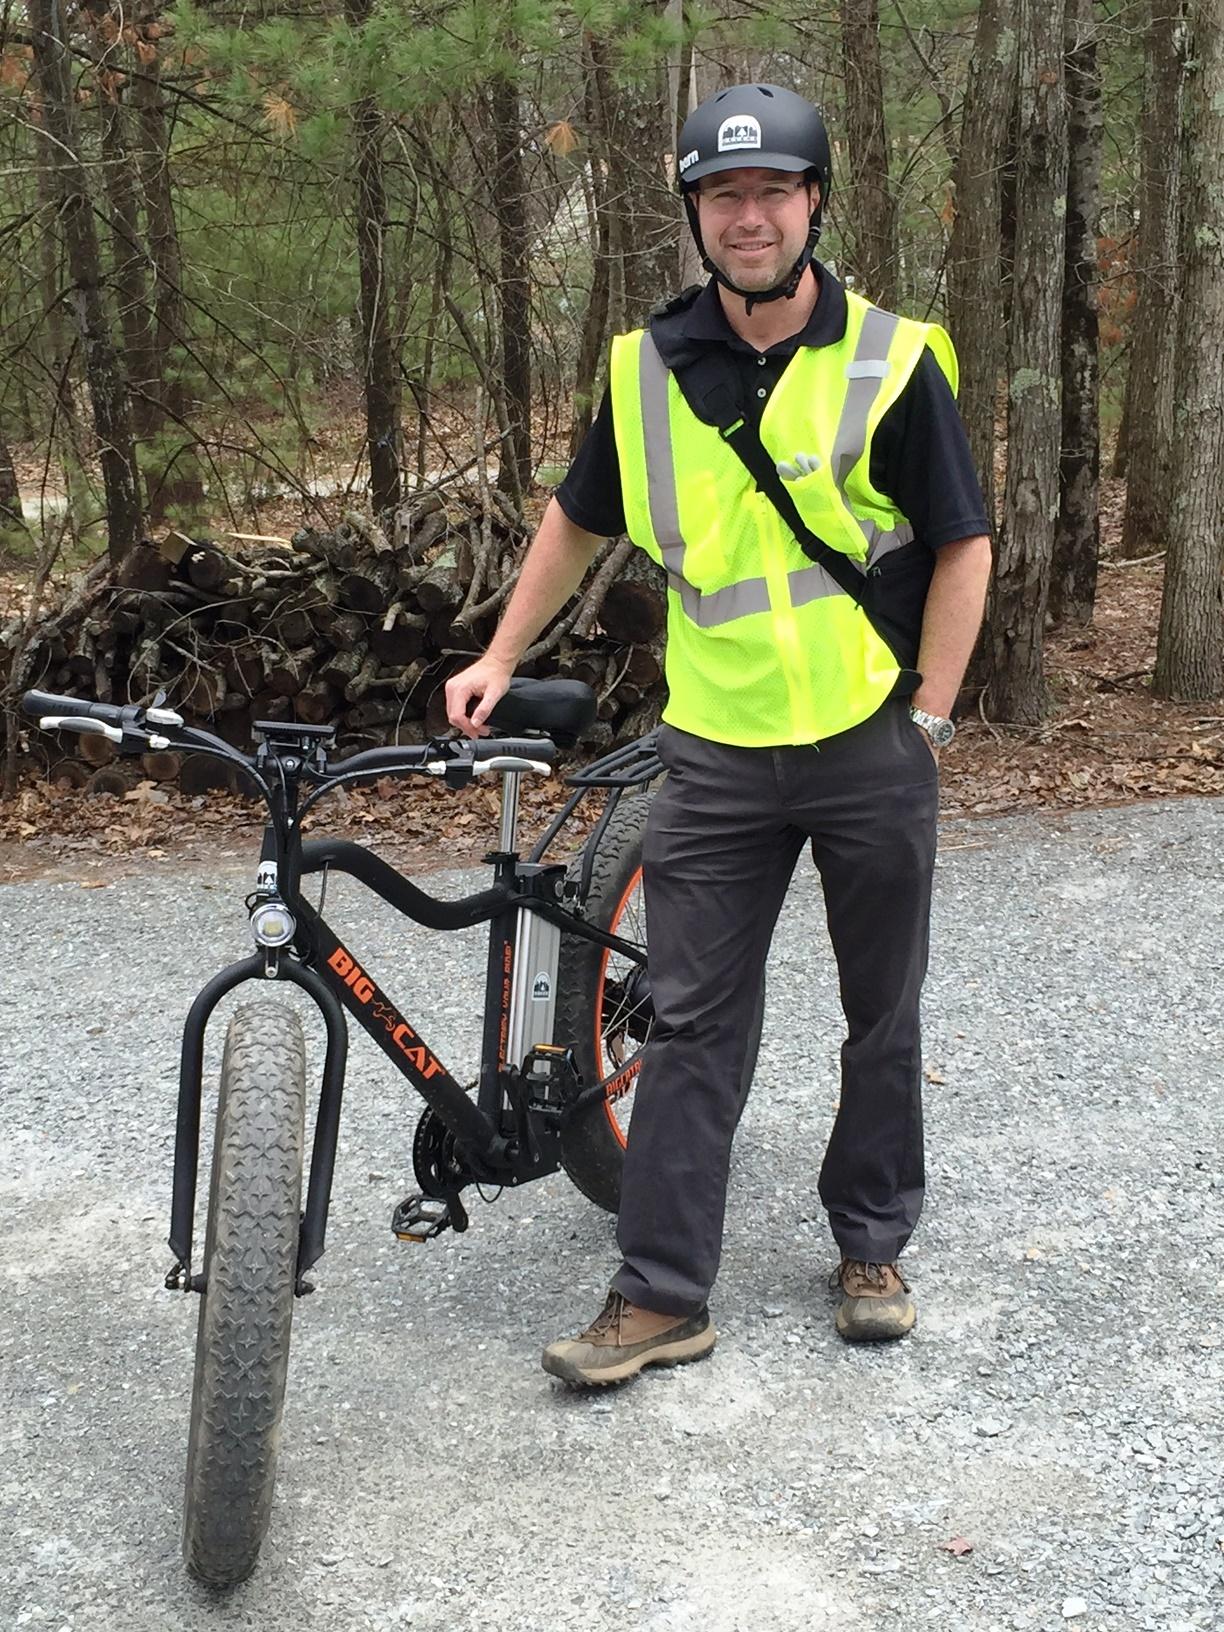 Neil is pictured standing next to a DEC electric bike.